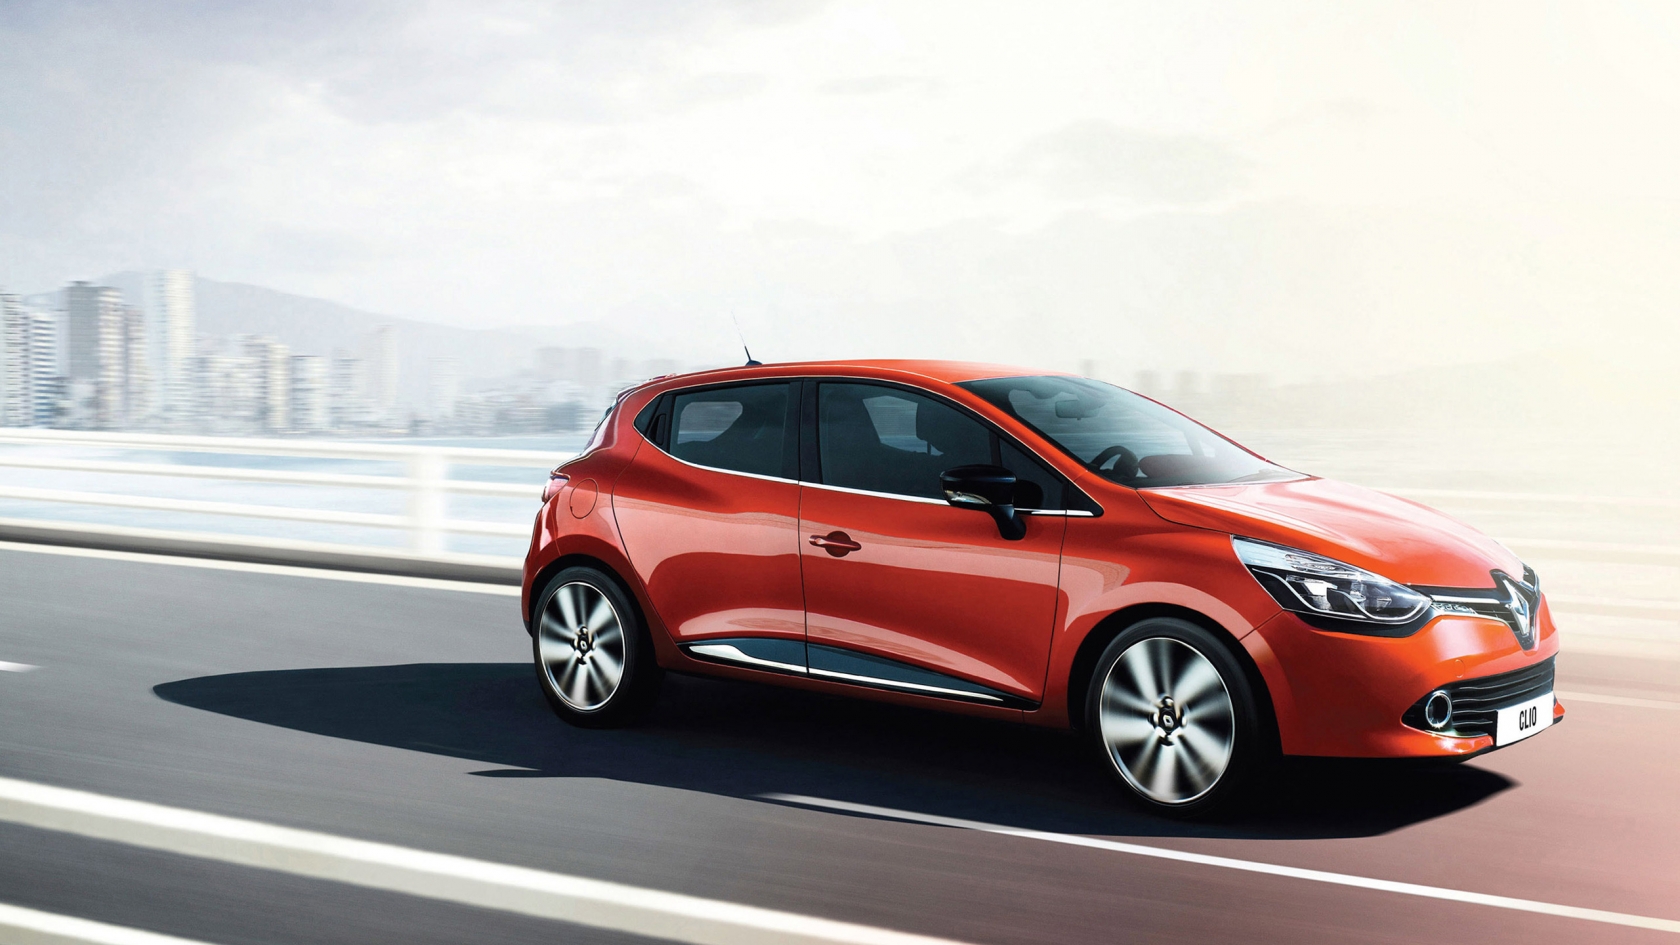 2013 Renault Clio for 1680 x 945 HDTV resolution